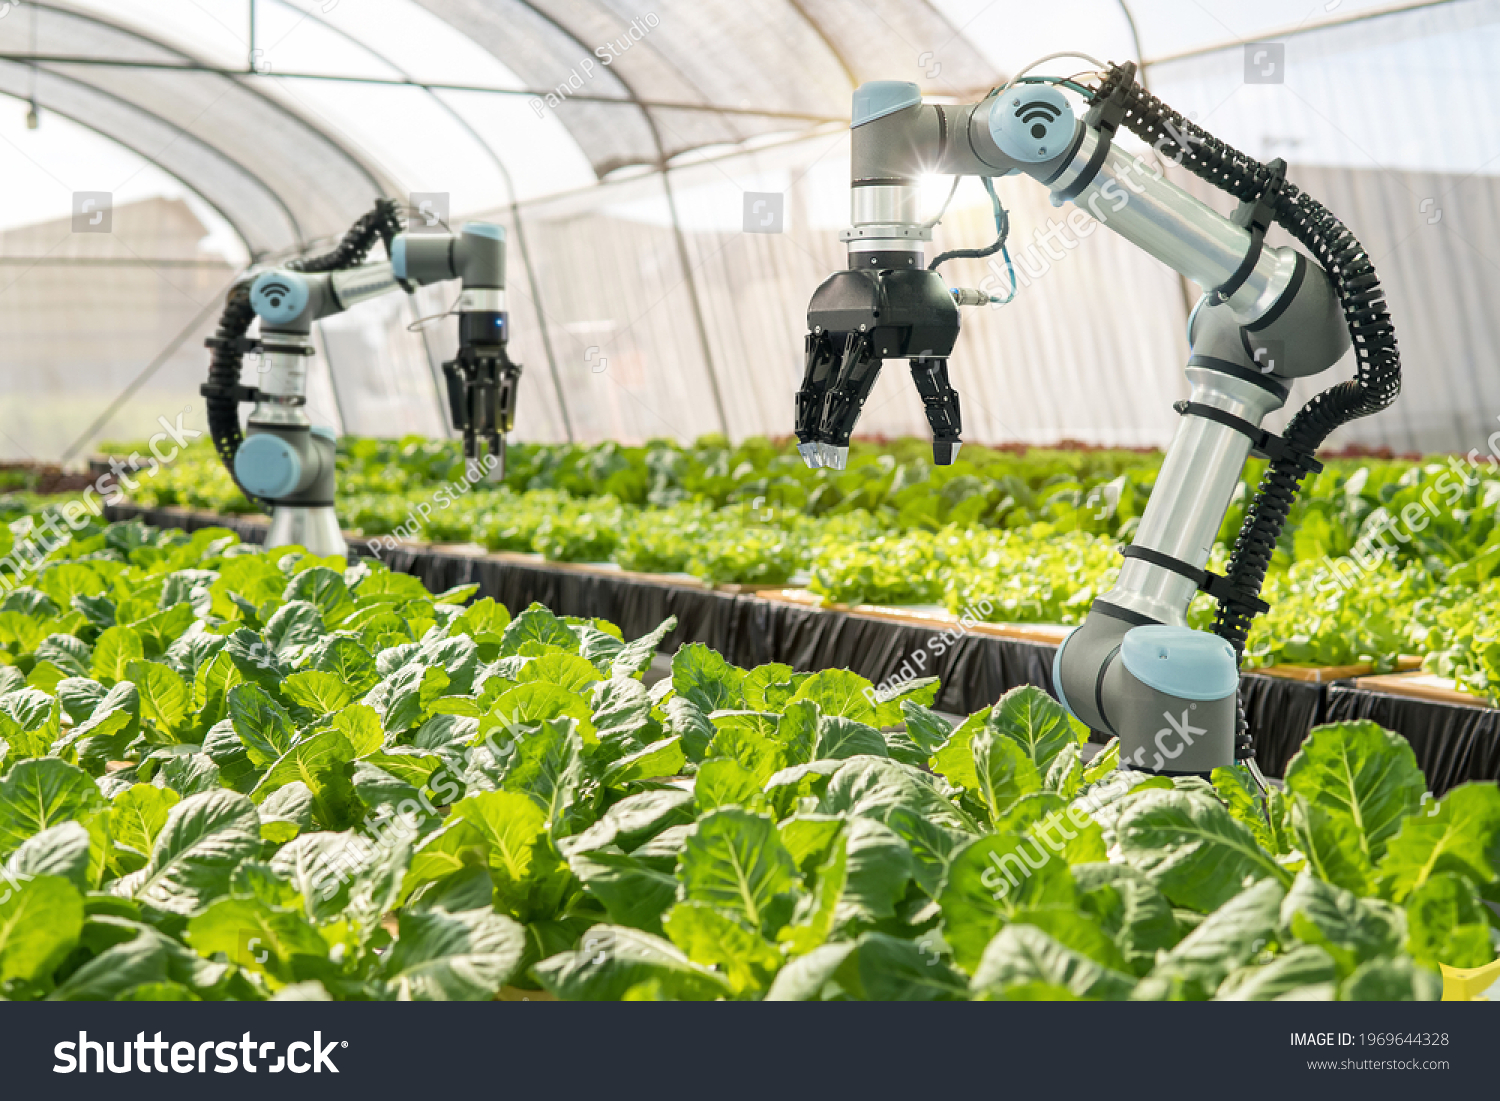 Smart farming agricultural technology Robotic arm harvesting hydroponic lettuce in a greenhouse #1969644328